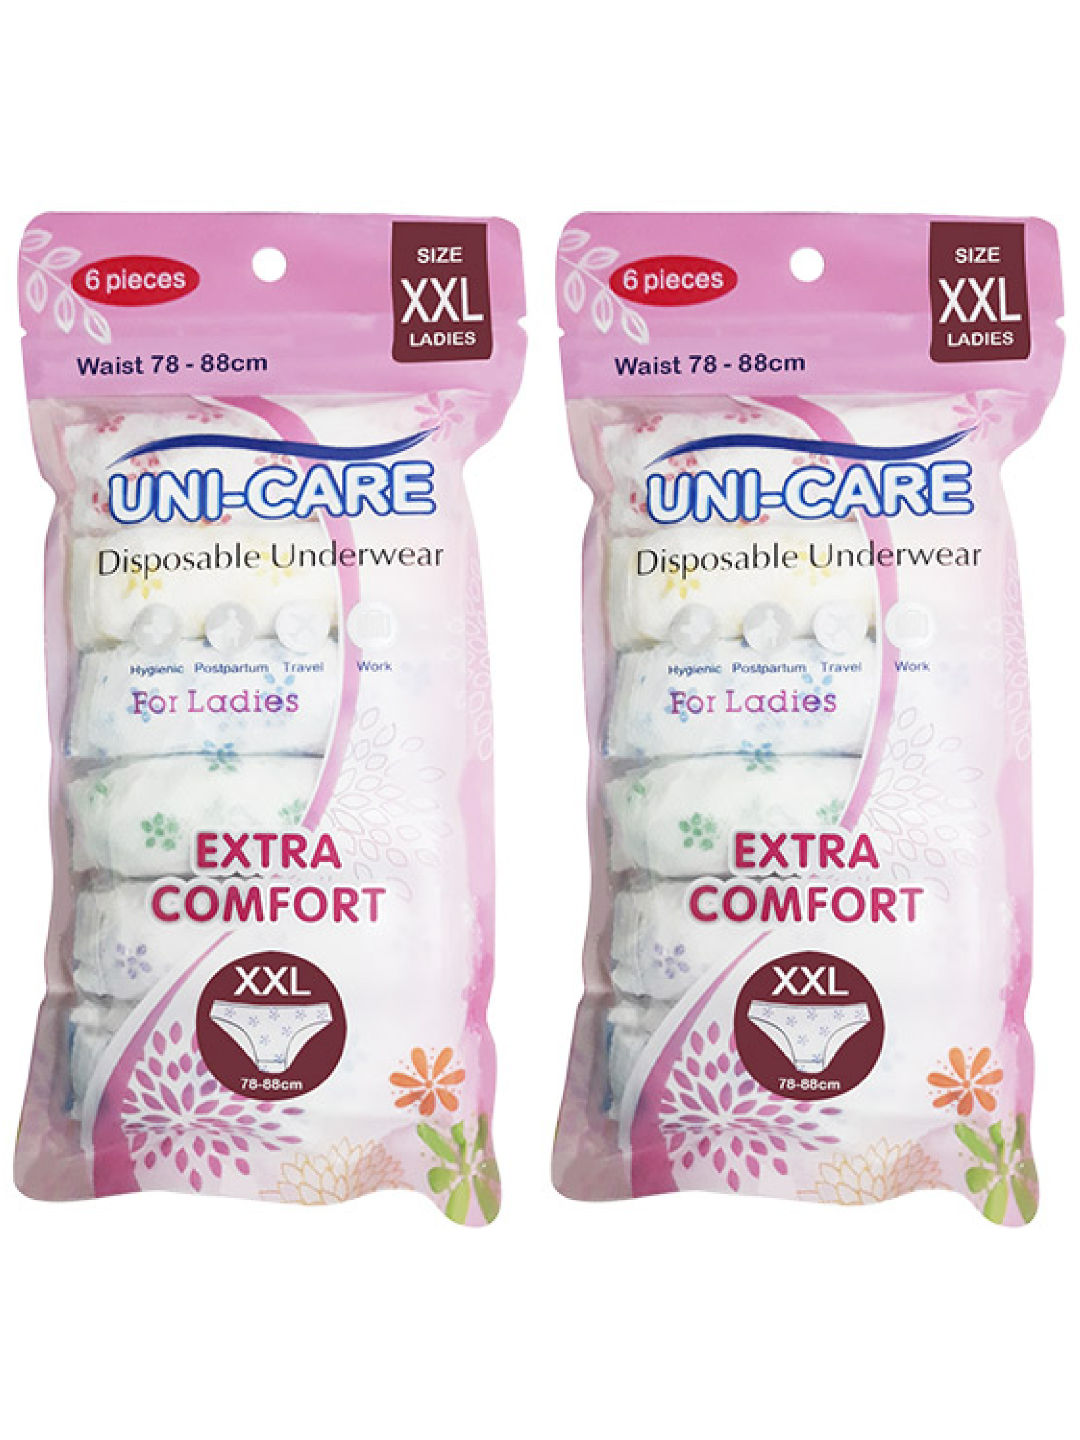 Uni-care Disposable Underwear for Women 78-88cm (6 sheets) - Pack of 2 (No Color- Image 1)